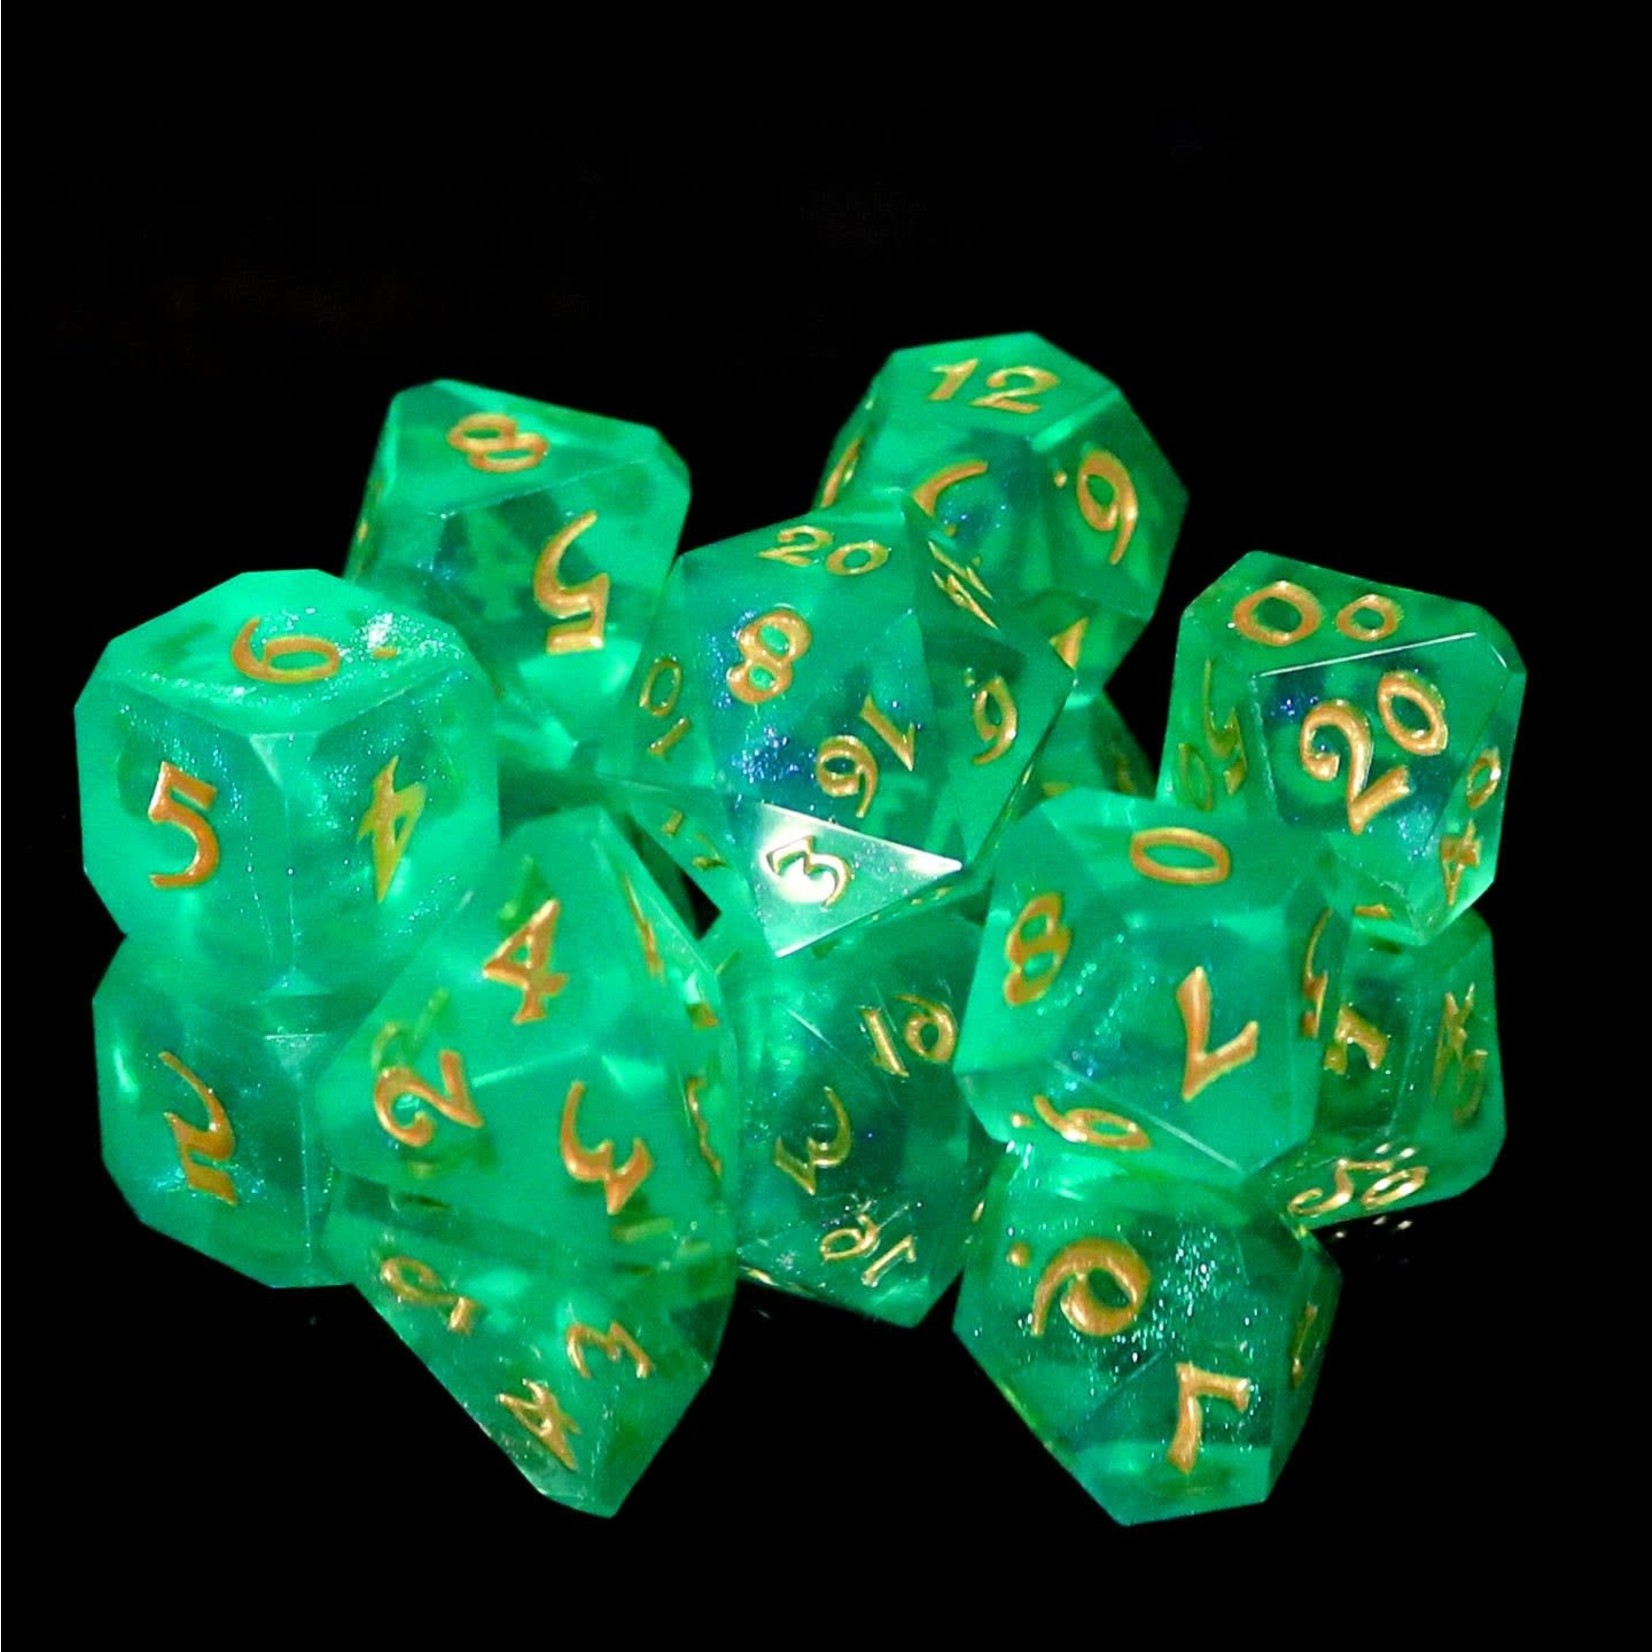 Die Hard Dice 7 Piece RPG Set - Avalore Tinkling Bell for Superdillin